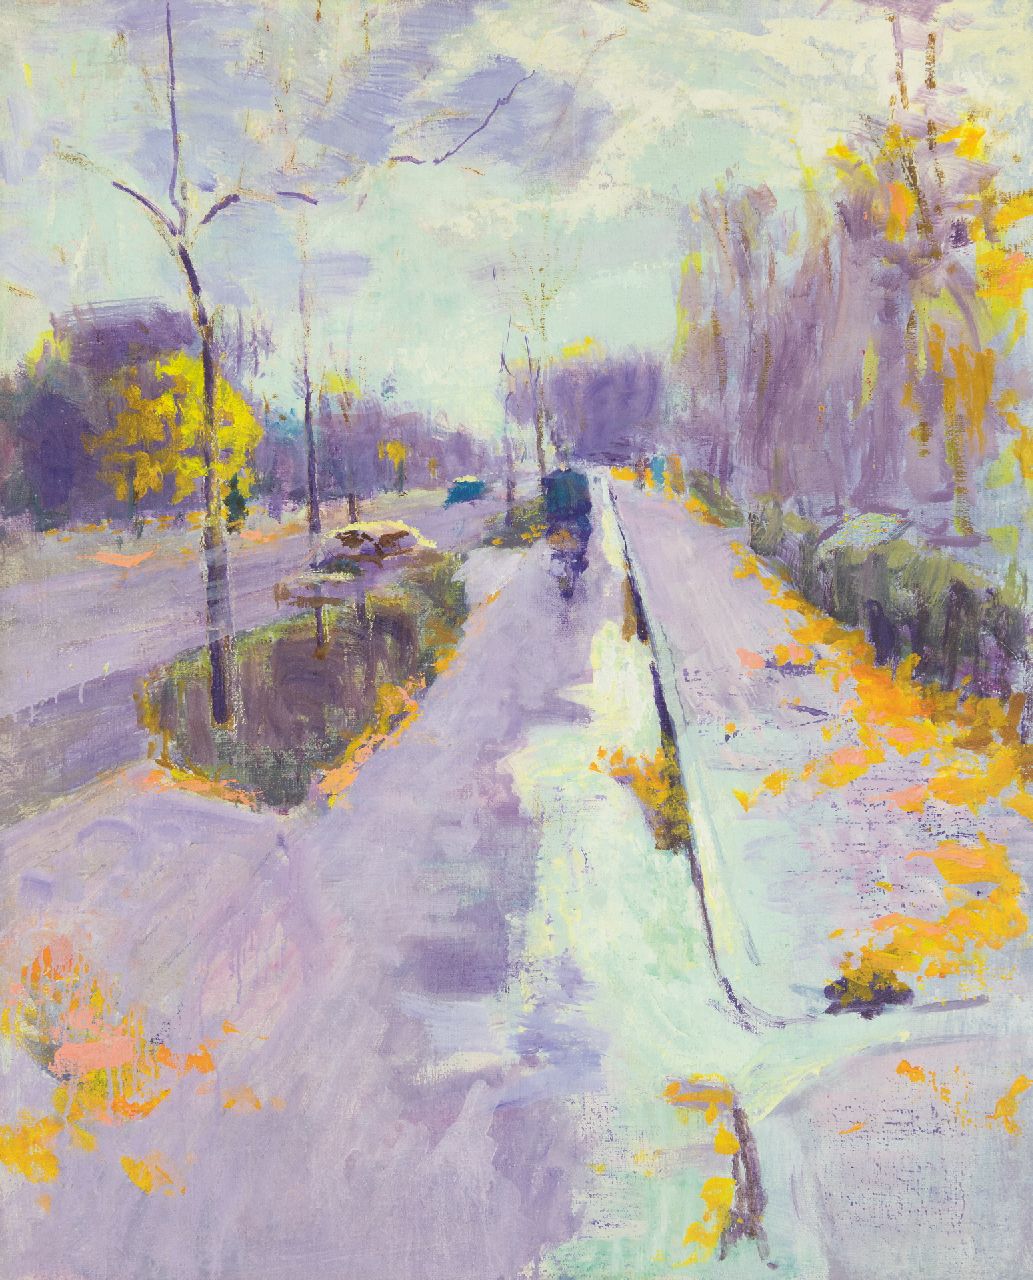 Altink J.  | Jan Altink | Paintings offered for sale | Cyclist on the Hereweg in Groningen, oil on canvas 100.4 x 80.1 cm, painted end 1920's